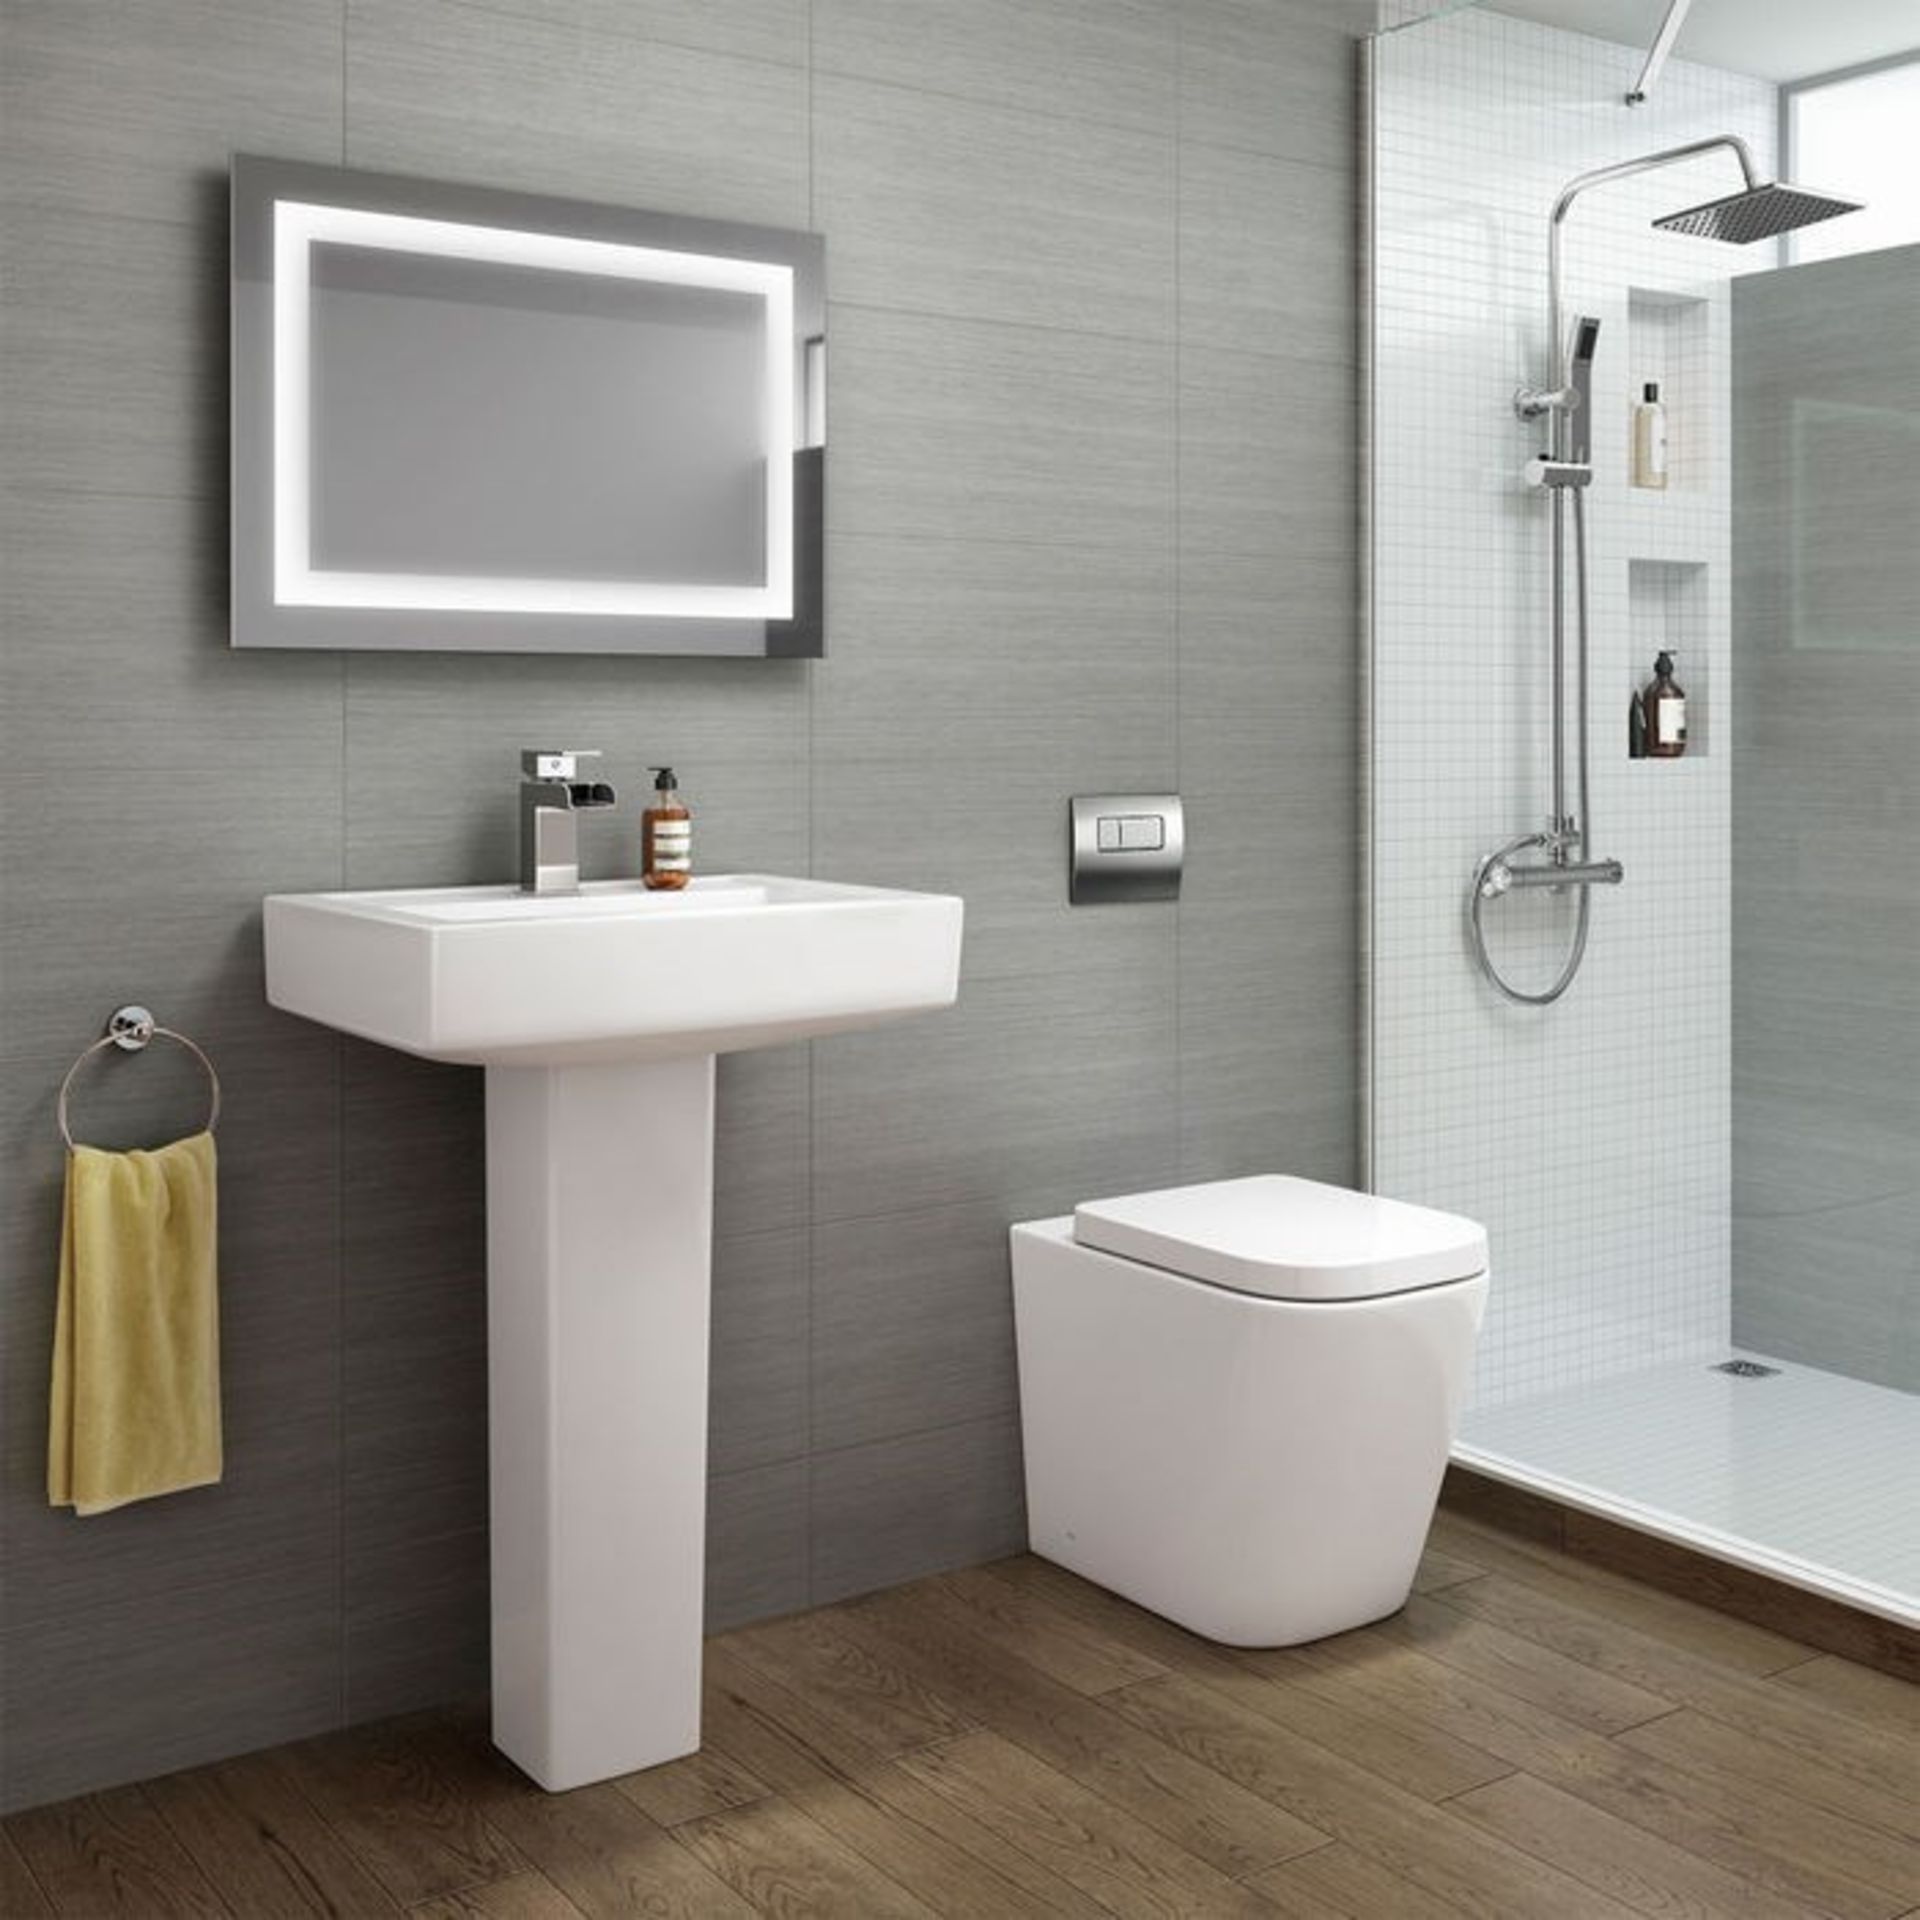 NEW & BOXED Florence Rimless Back to Wall Toilet inc Luxury Soft Close Seat. RRP £349.99 each... - Image 2 of 2